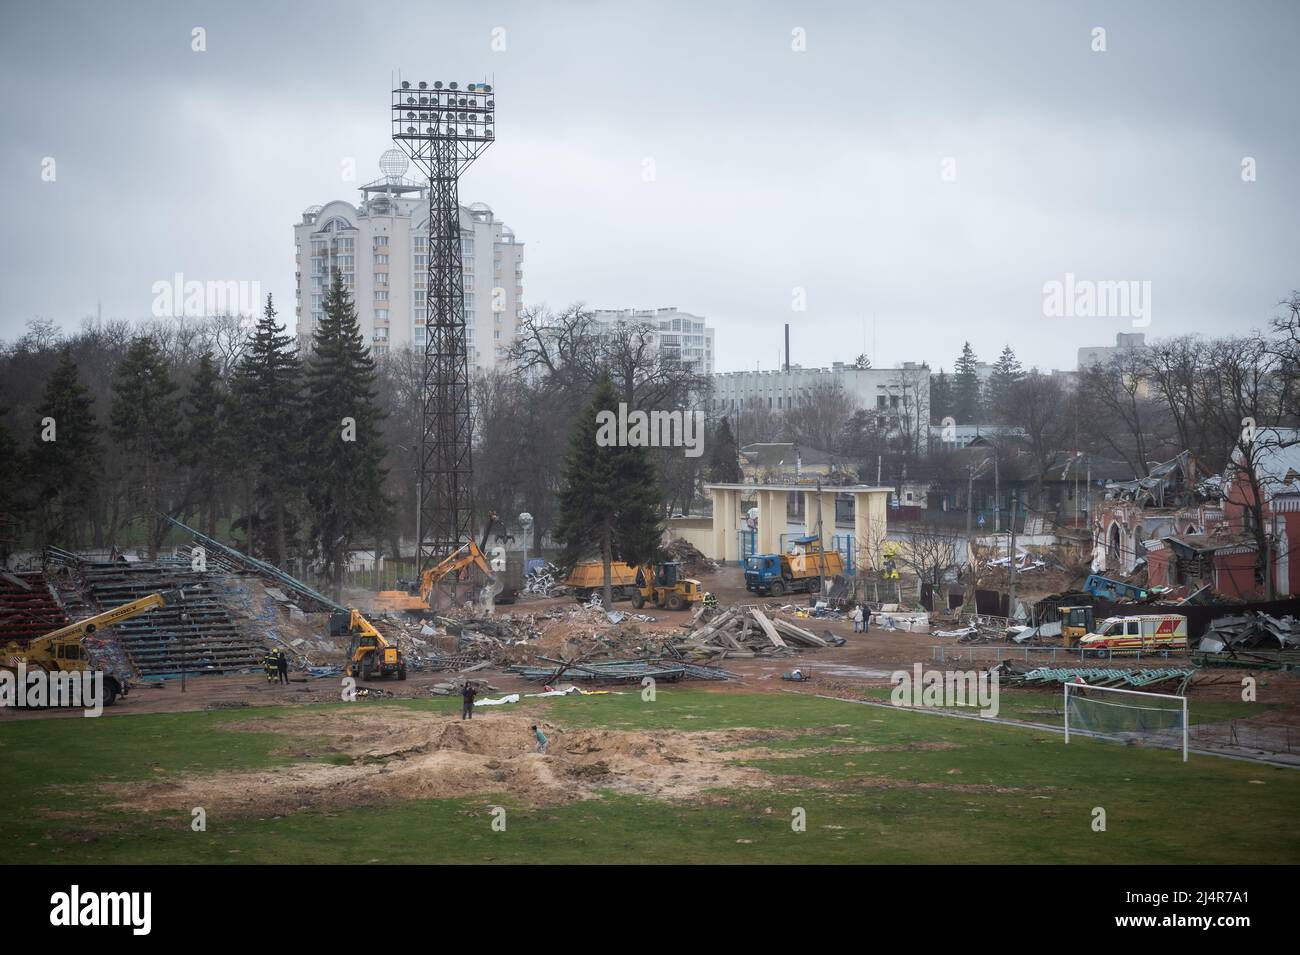 Ukraine. 16th Apr, 2022. People inspect a crater in a football pitch at the stadium a residential area of Chernihiv, Ukraine damaged by shelling during the Russian invasion on April 16, 2022. Russian military forces entered Ukraine territory on Feb. 24, 2022. (Photo by Piero Cruciatti/Sipa USA) Credit: Sipa USA/Alamy Live News Stock Photo